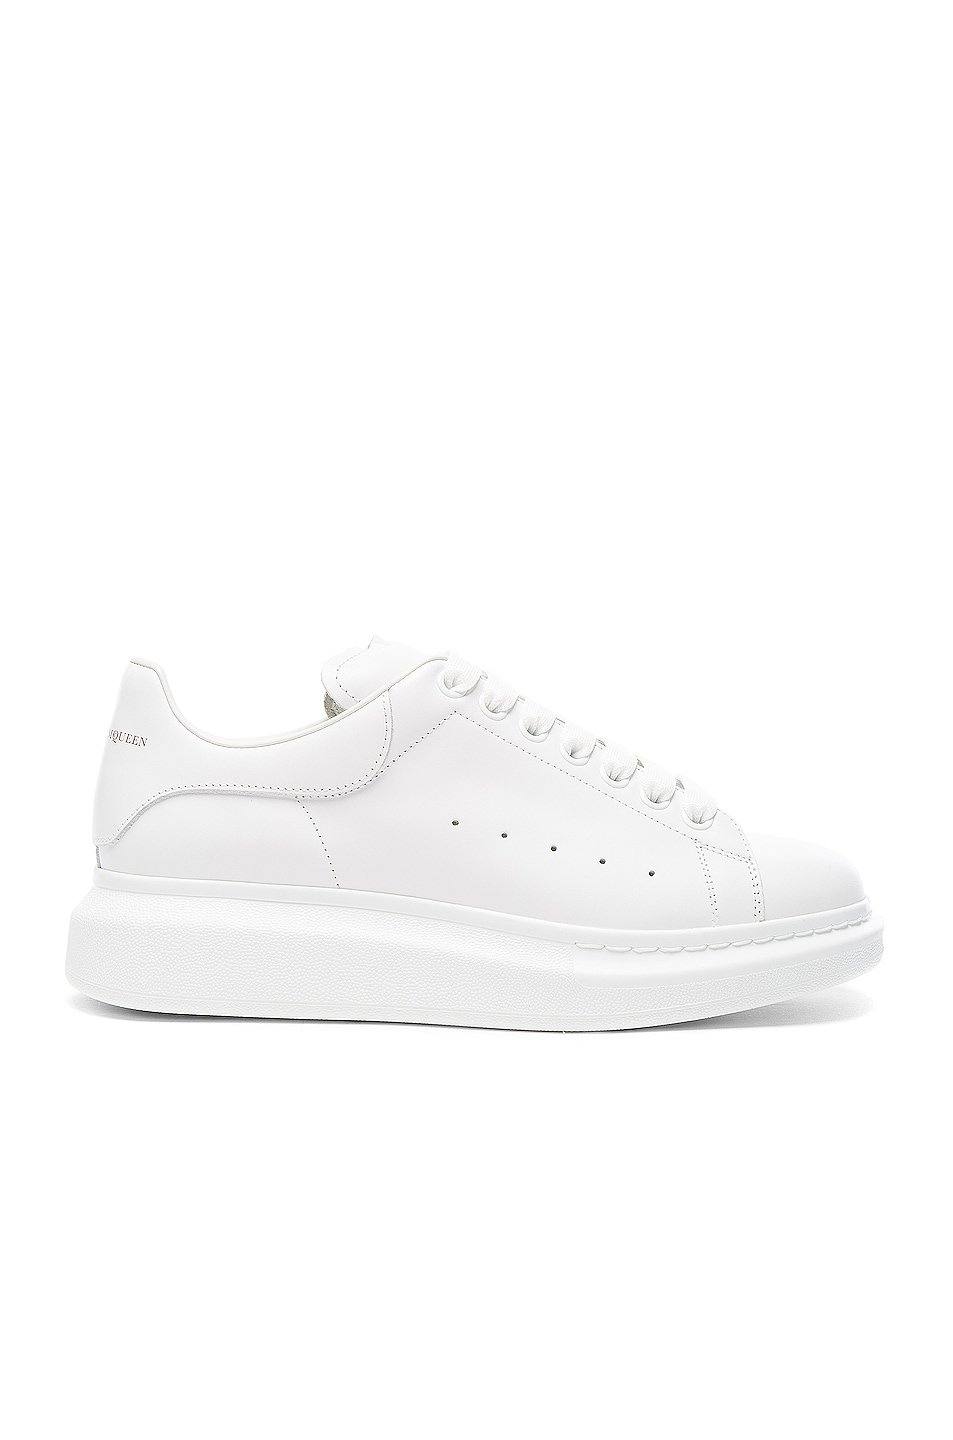 Image 1 of Alexander McQueen Leather Platform Sneakers in White